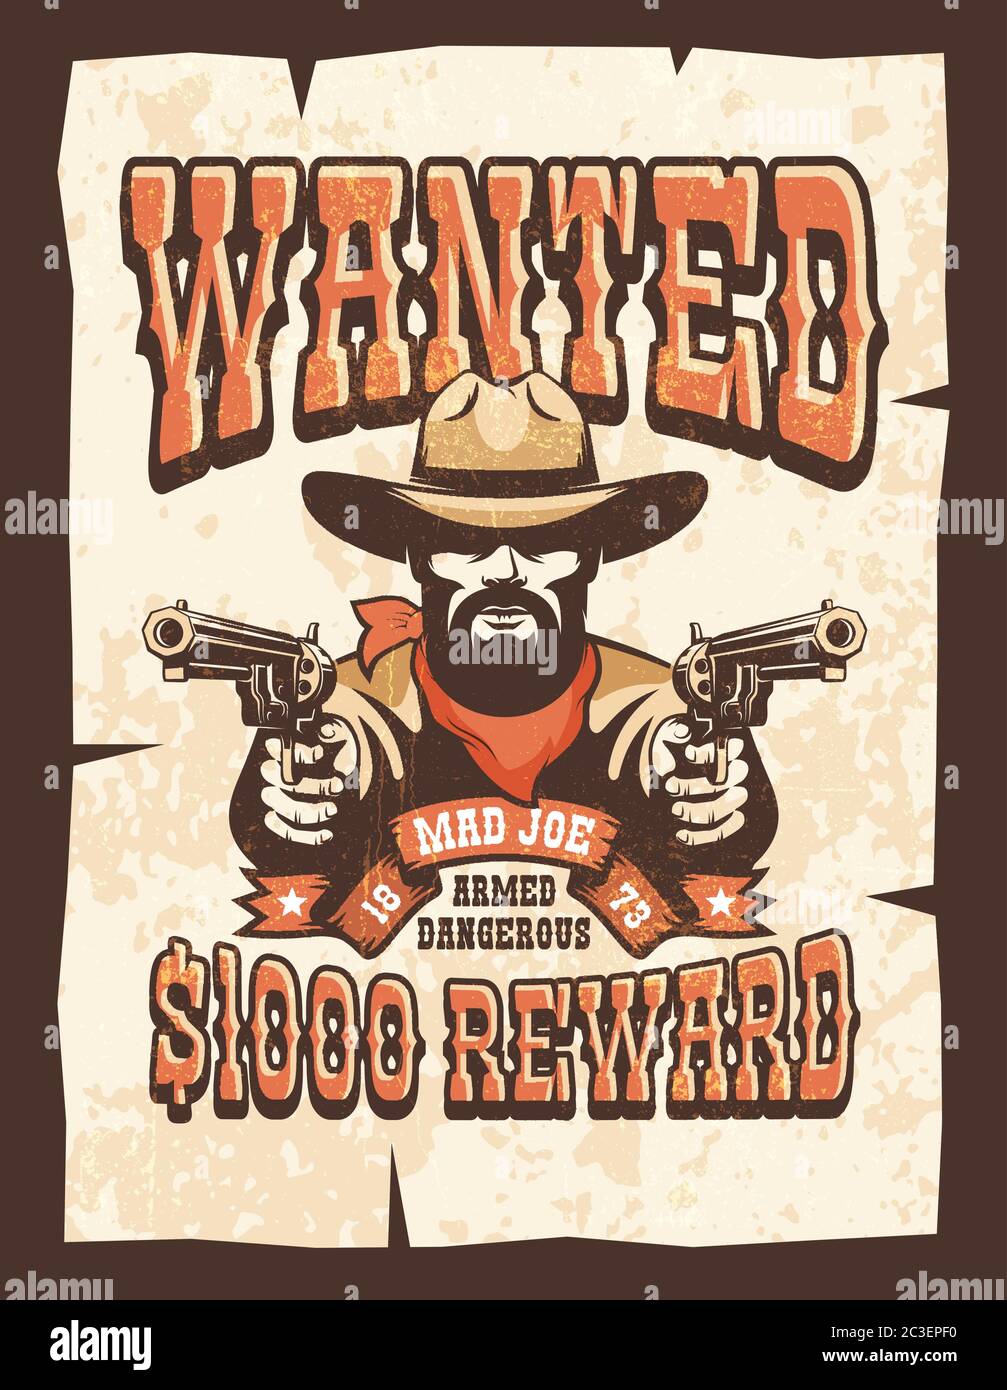 Wanted Bearded cowboy with guns vintage poster Stock Vector